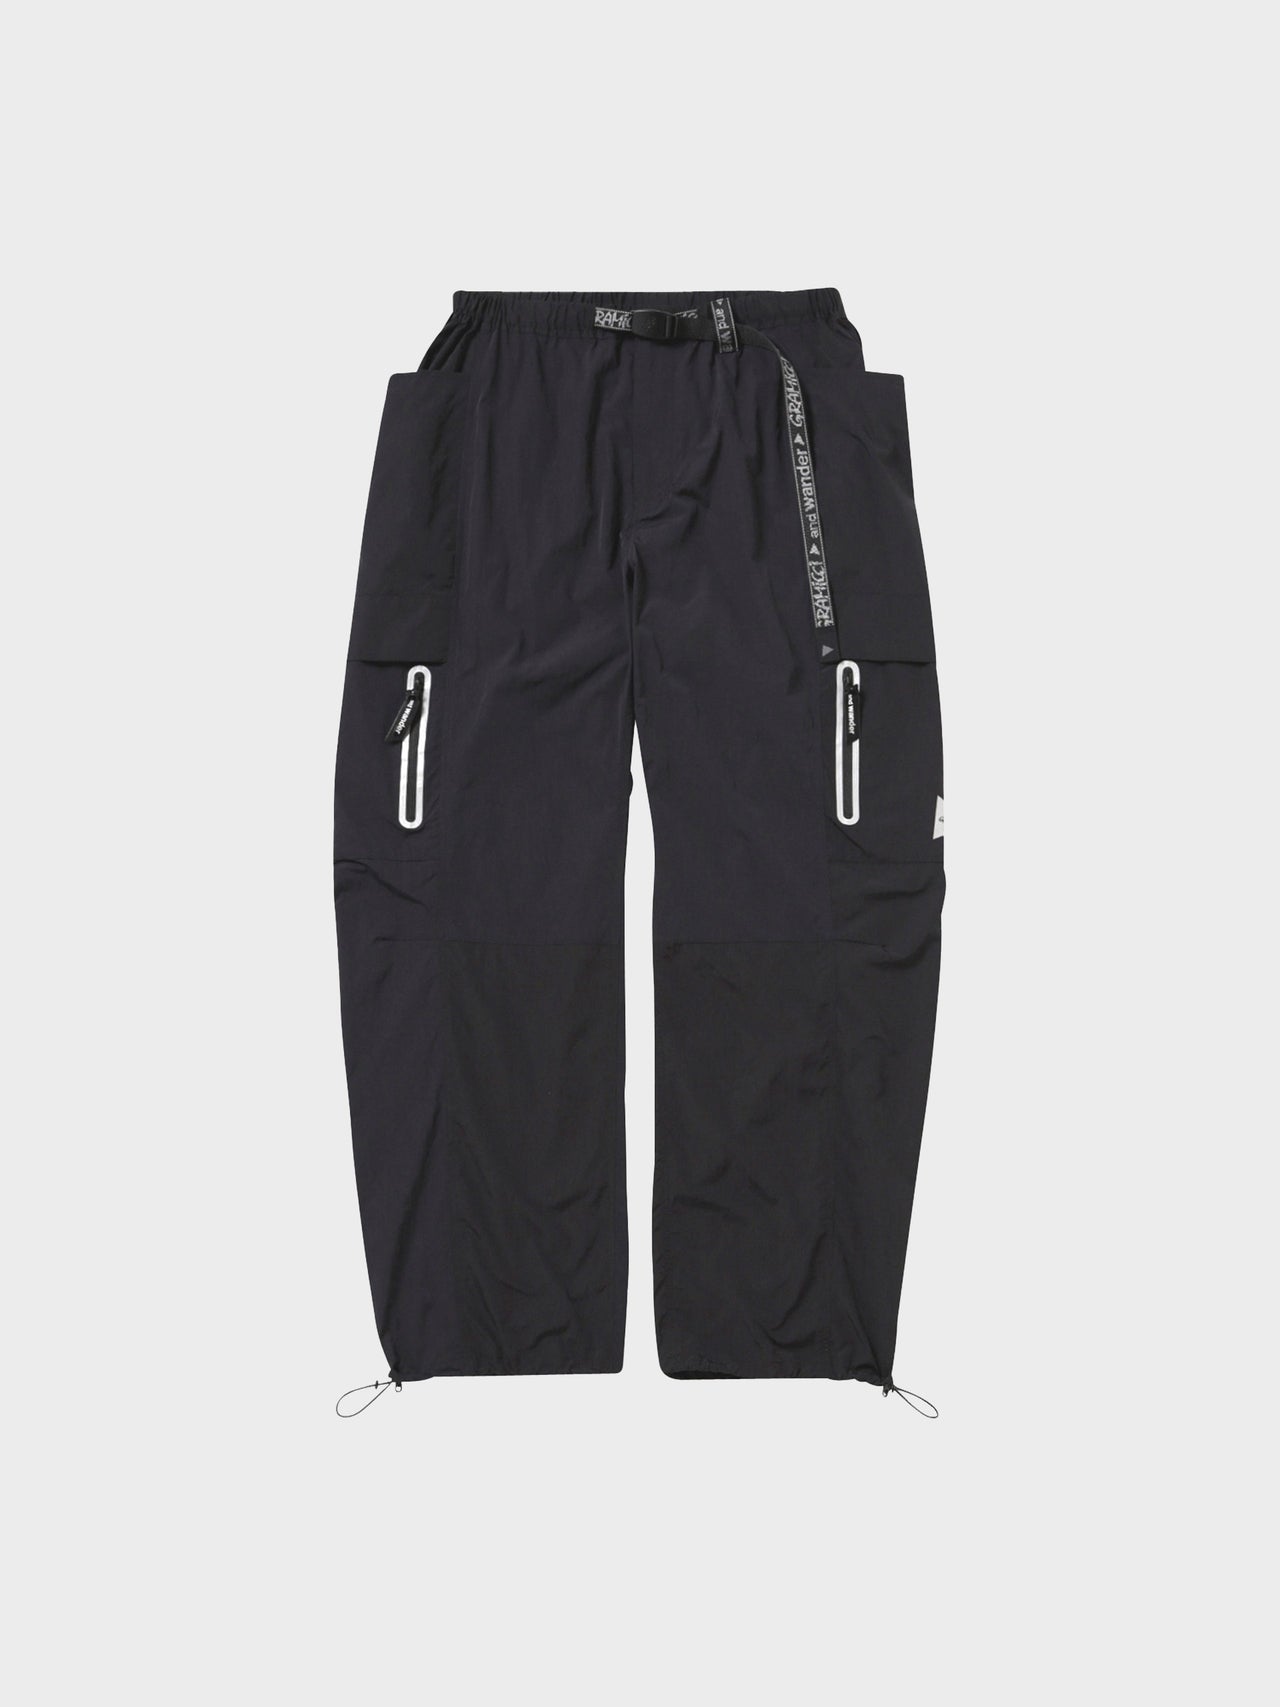 Gramicci x And Wander Patchwork Wind Pant Black